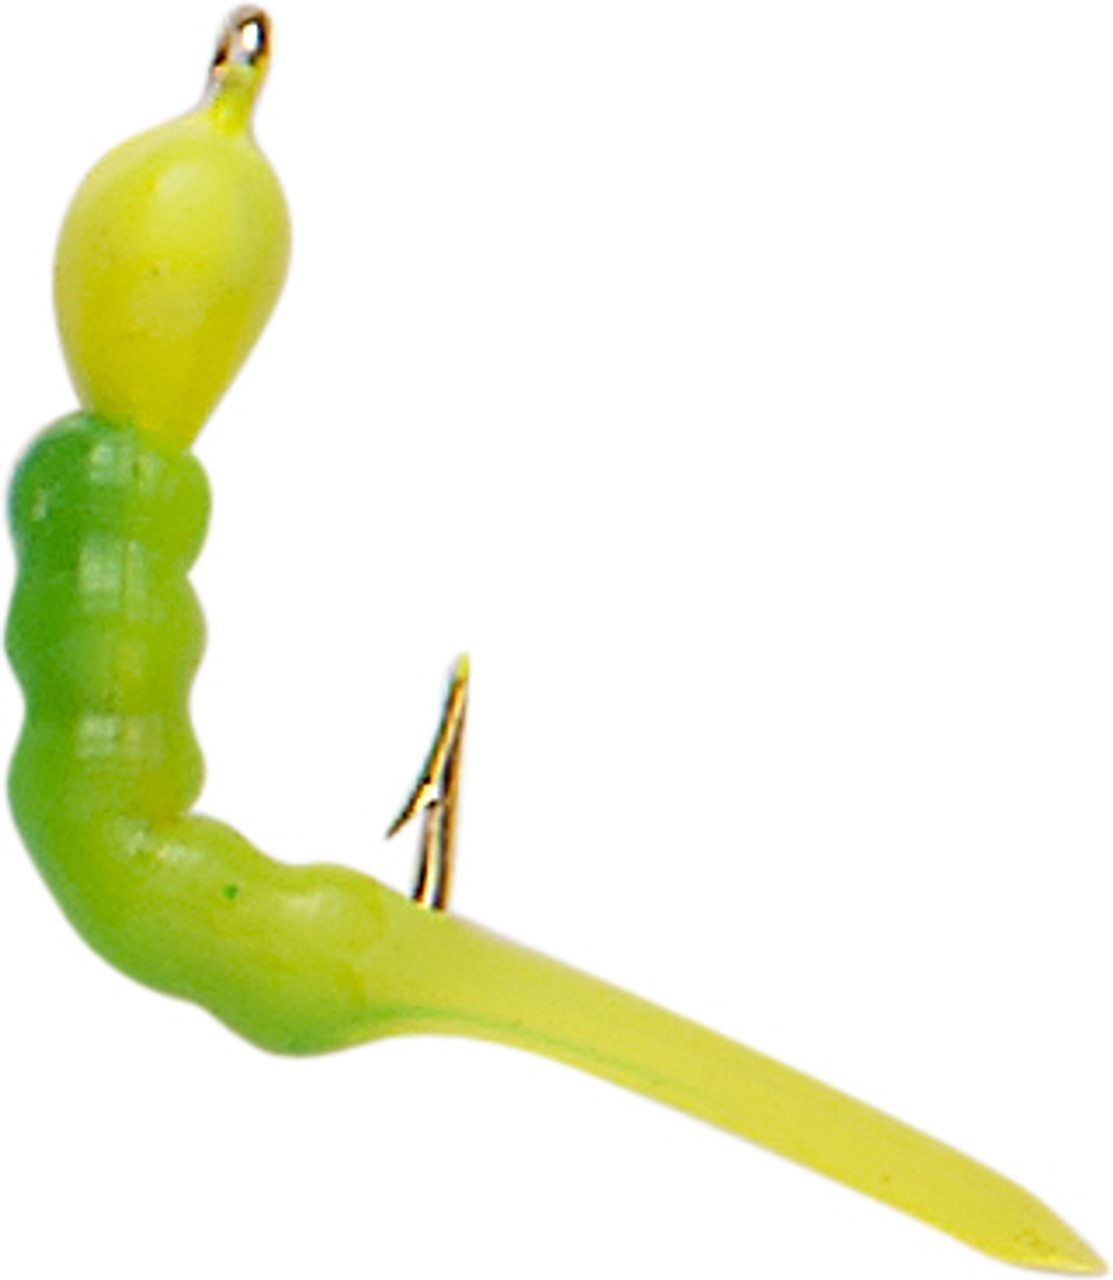 Shrimpo: Vertical Lead-Head Jig With Finesse Plastic Body